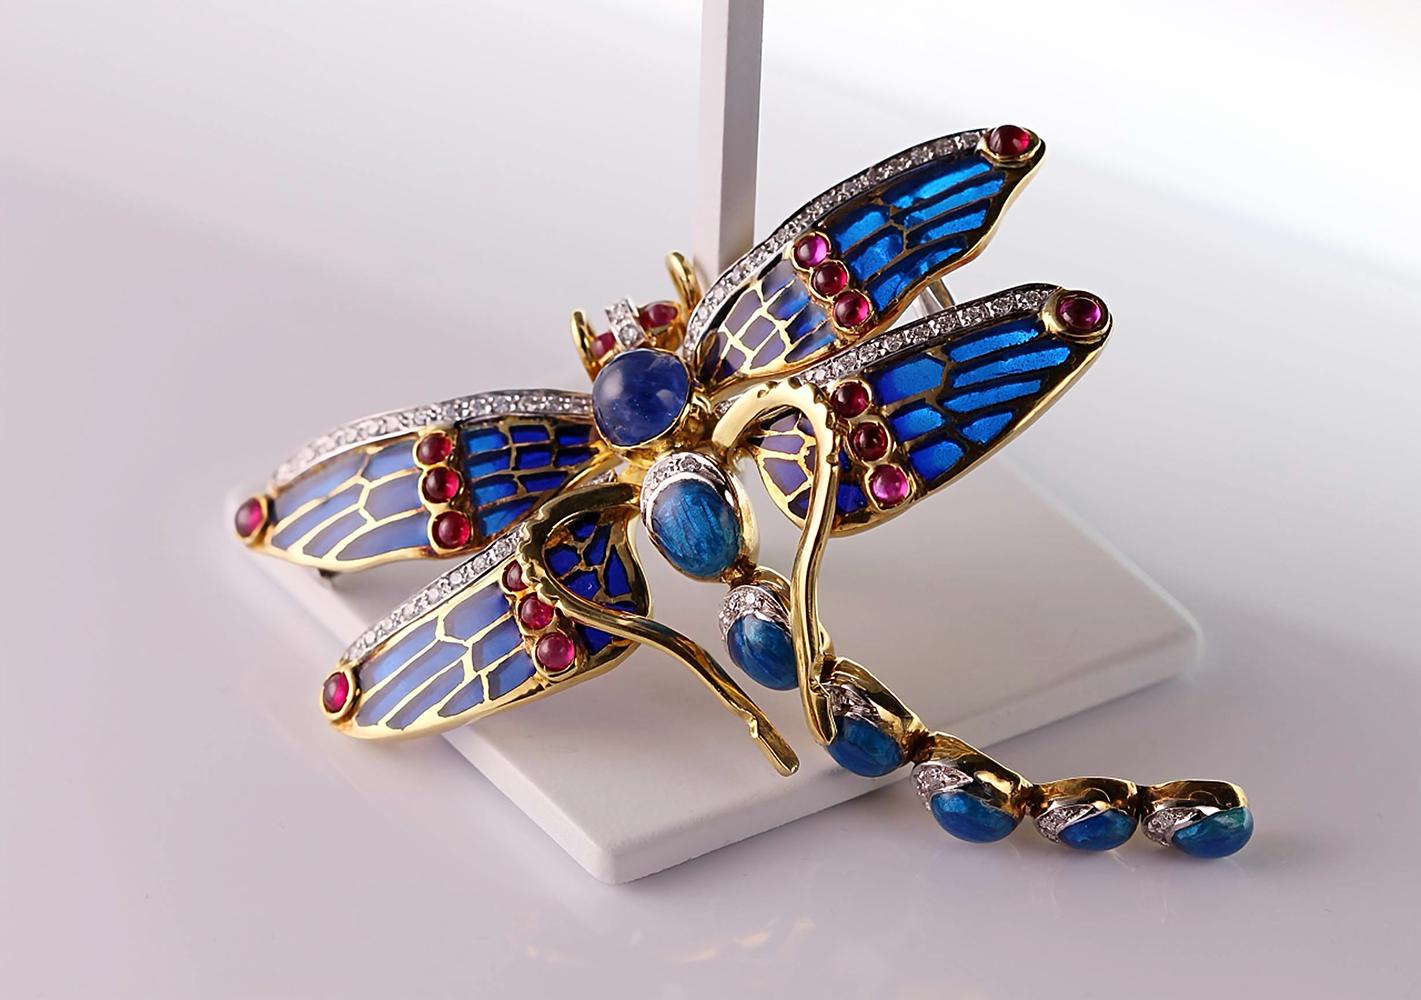 In a world constantly evolving, where the ancient merges with the modern, a creation emerges that encapsulates the very essence of nature: the dragonfly, a symbol of transformation and of a deep connection with the past.

This brooch, inspired by